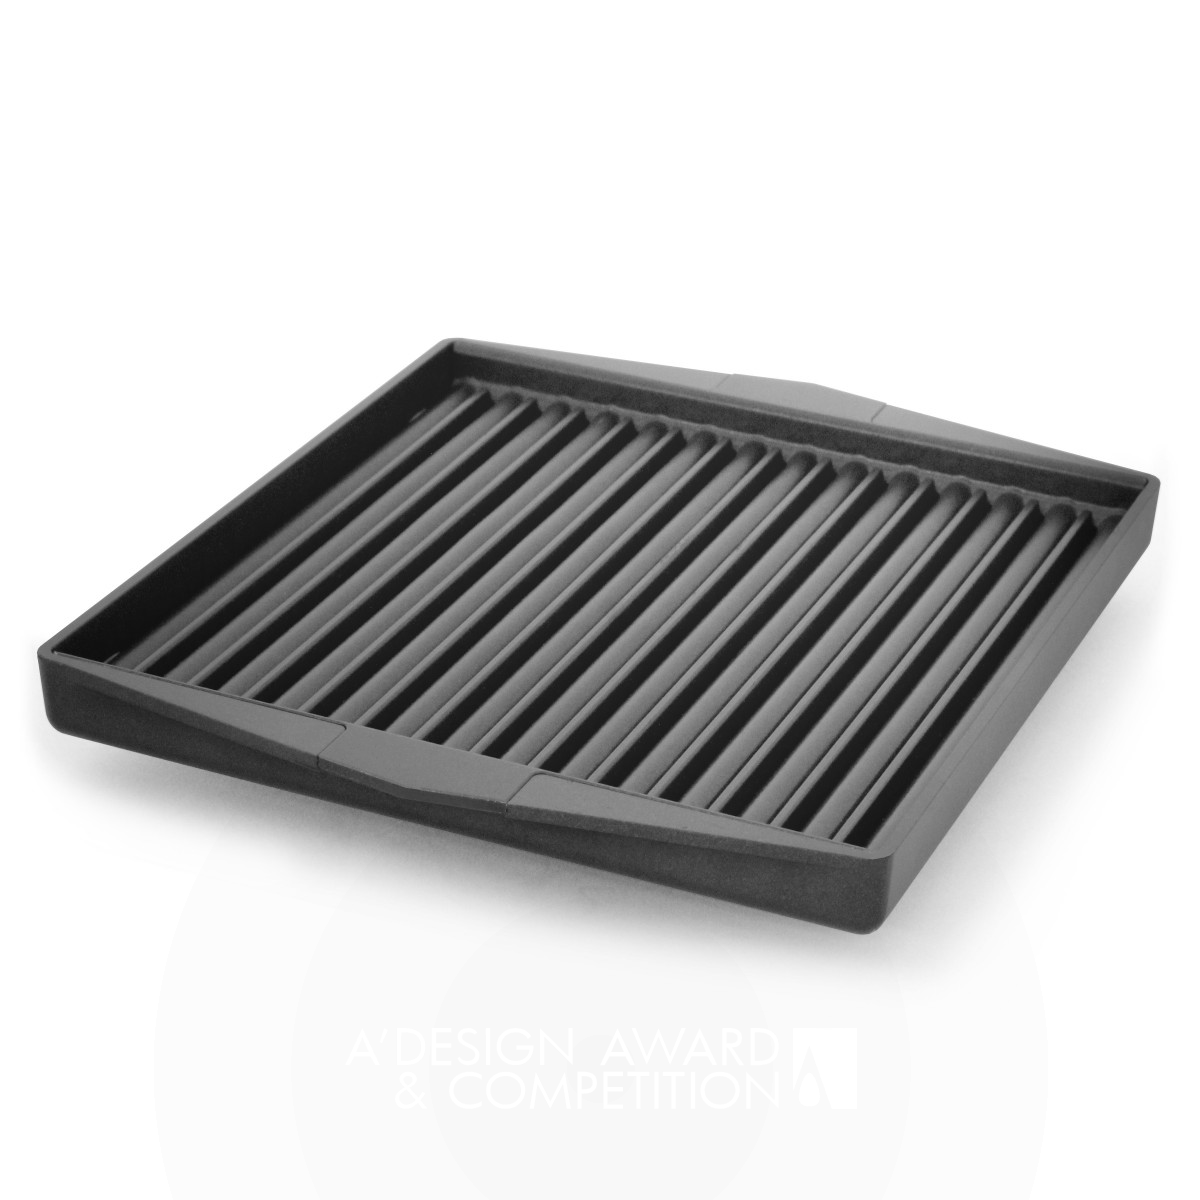 MiPan <b>Grill Pan Cooking Surface